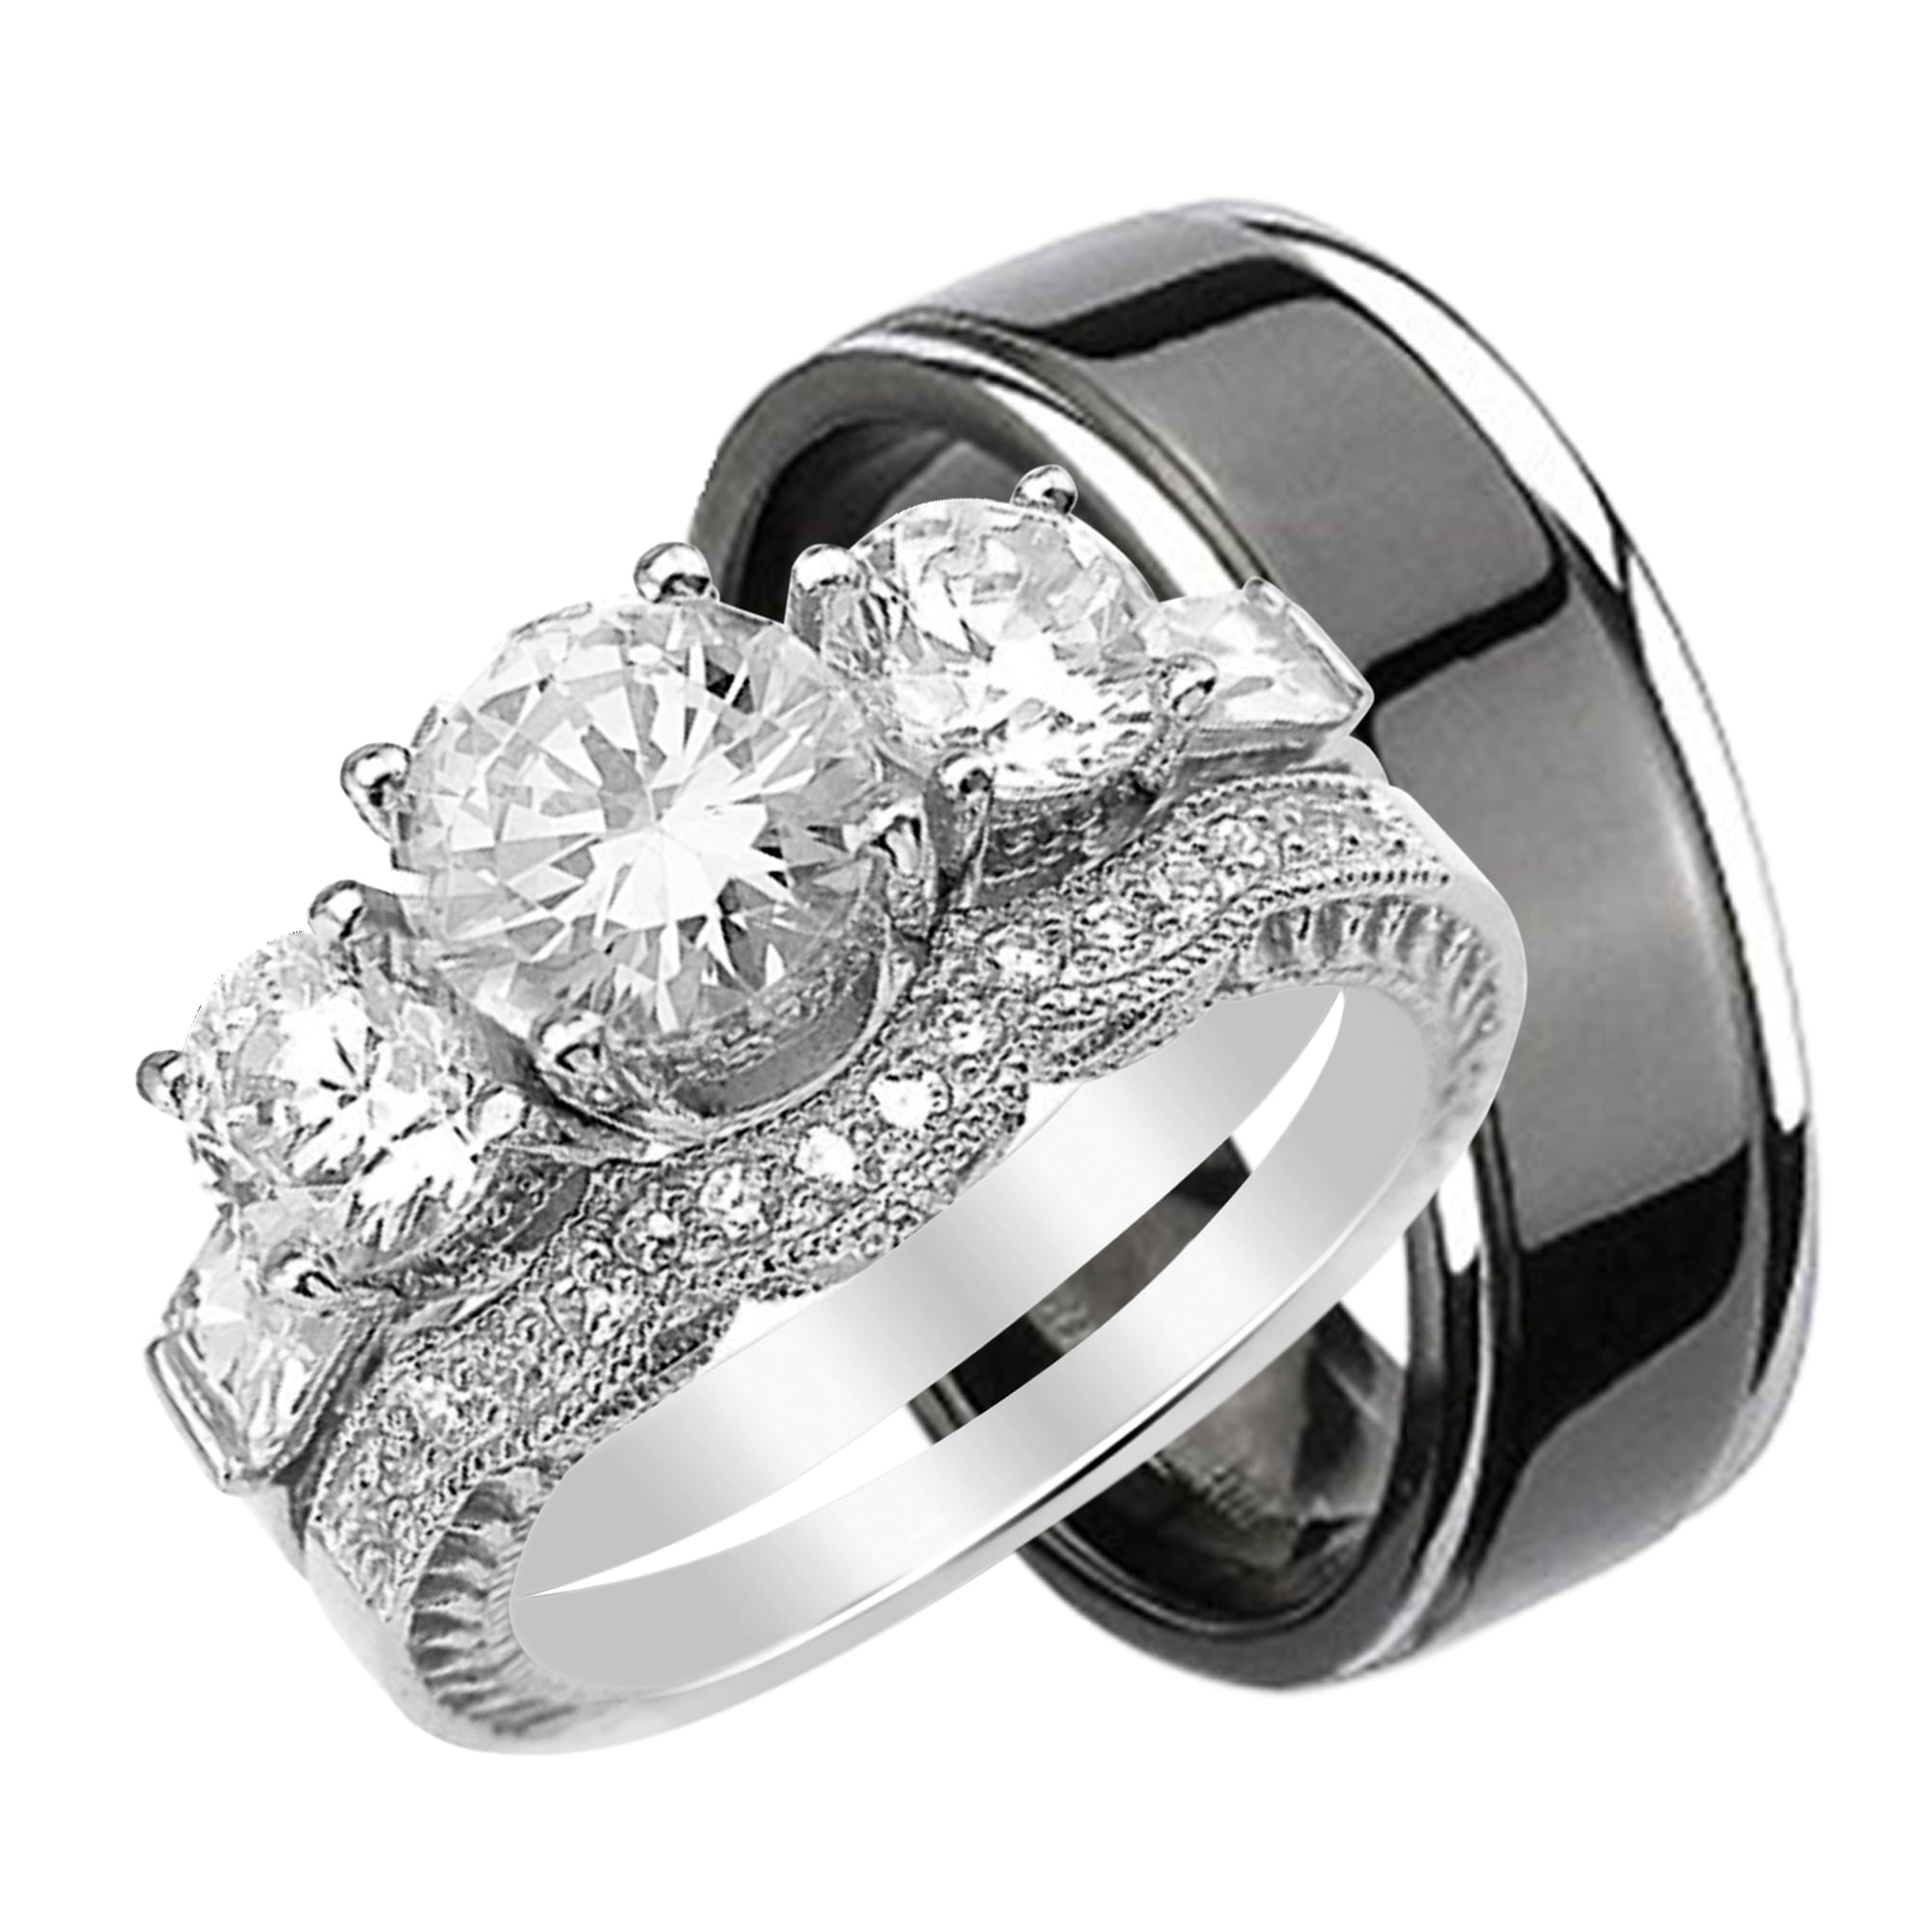 LaRaso & Co - His and Hers Wedding Rings Set Her Sterling Silver Black